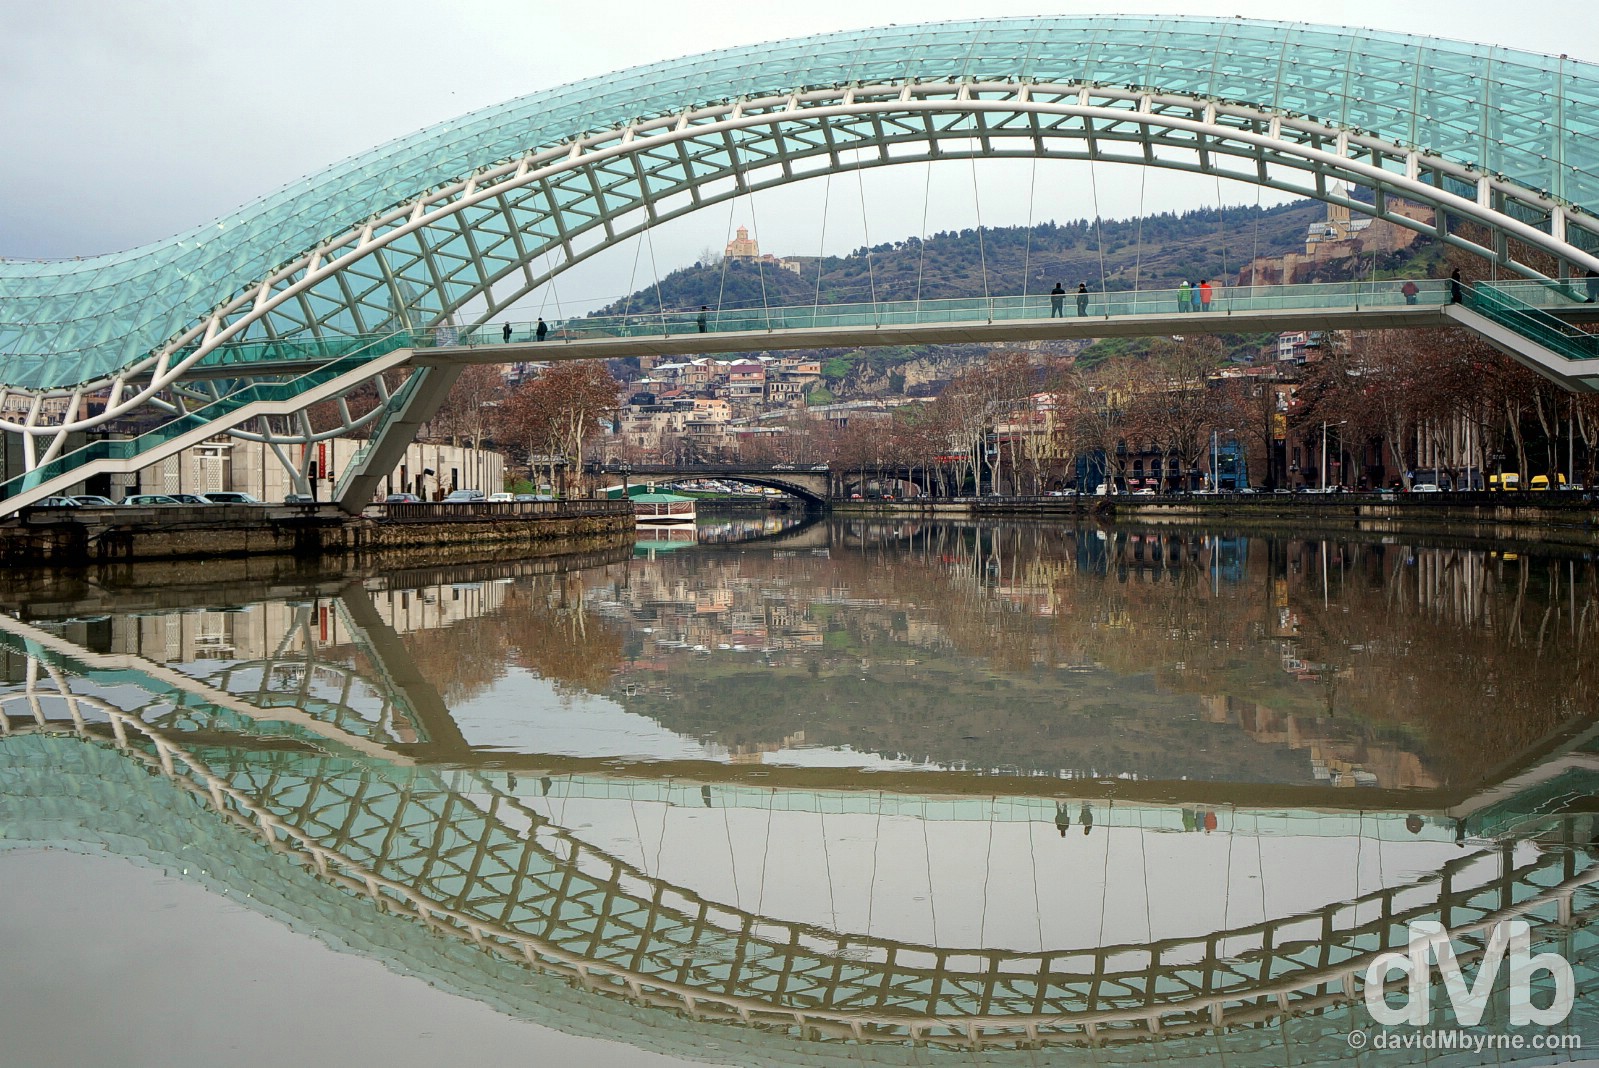 Reflections on the Kura River in Tbilisi, Georgia. March 20, 2015. 